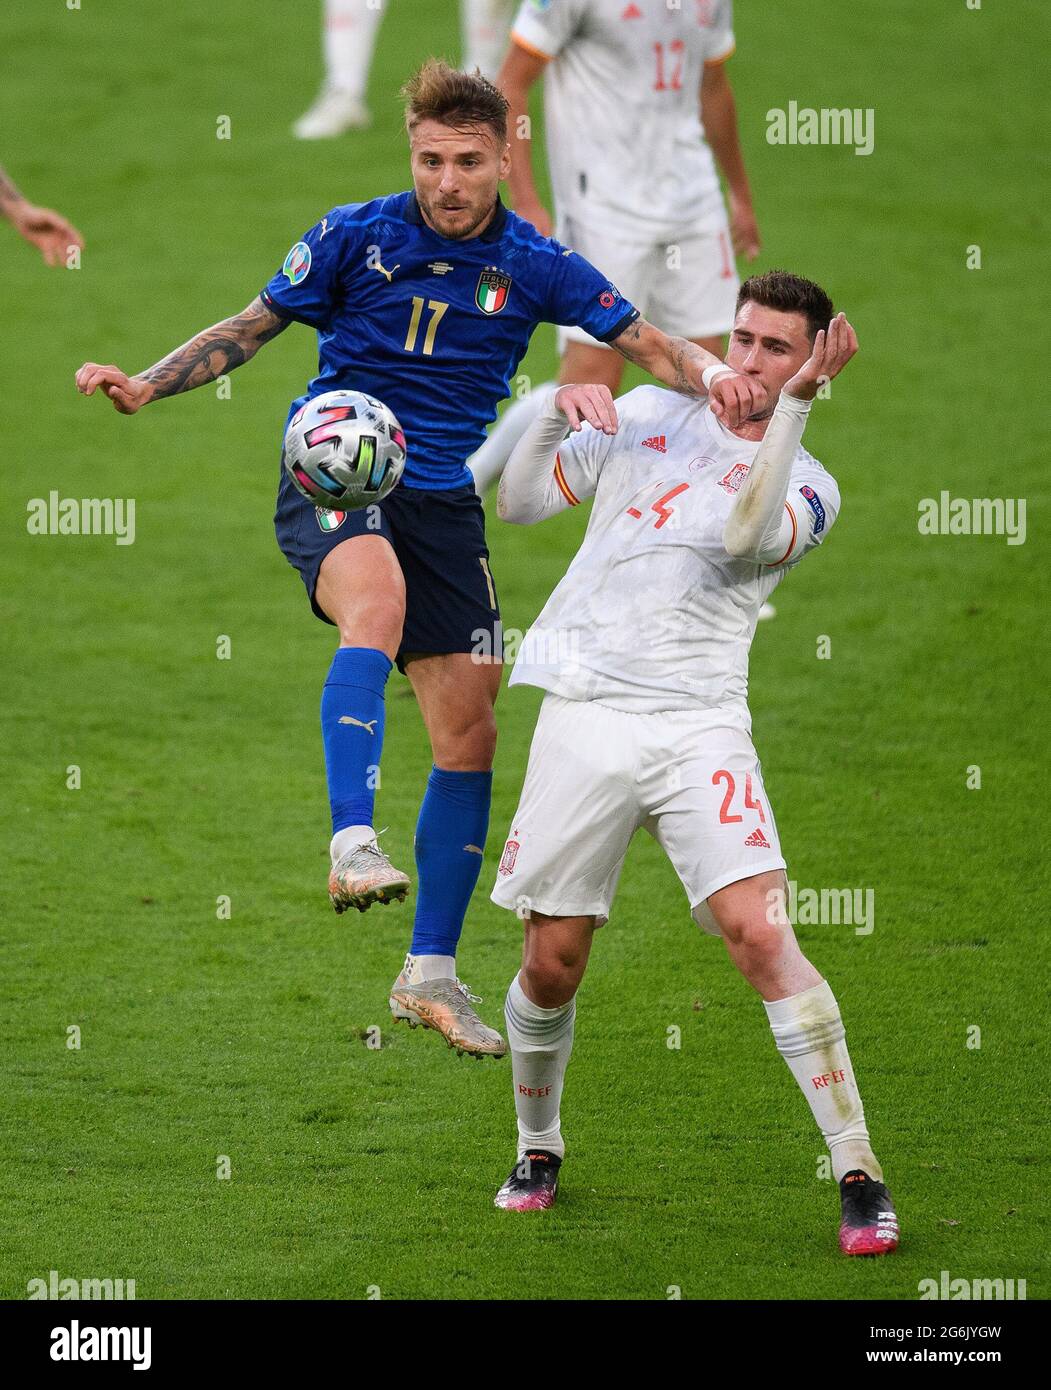 07 July 2021 - Italy v Spain - UEFA Euro 2020 Semi-Final - Wembley - London  Italy's Italy's Ciro Immobile battles with Aymeric Laporte Picture Credit : © Mark Pain / Alamy Live News Stock Photo